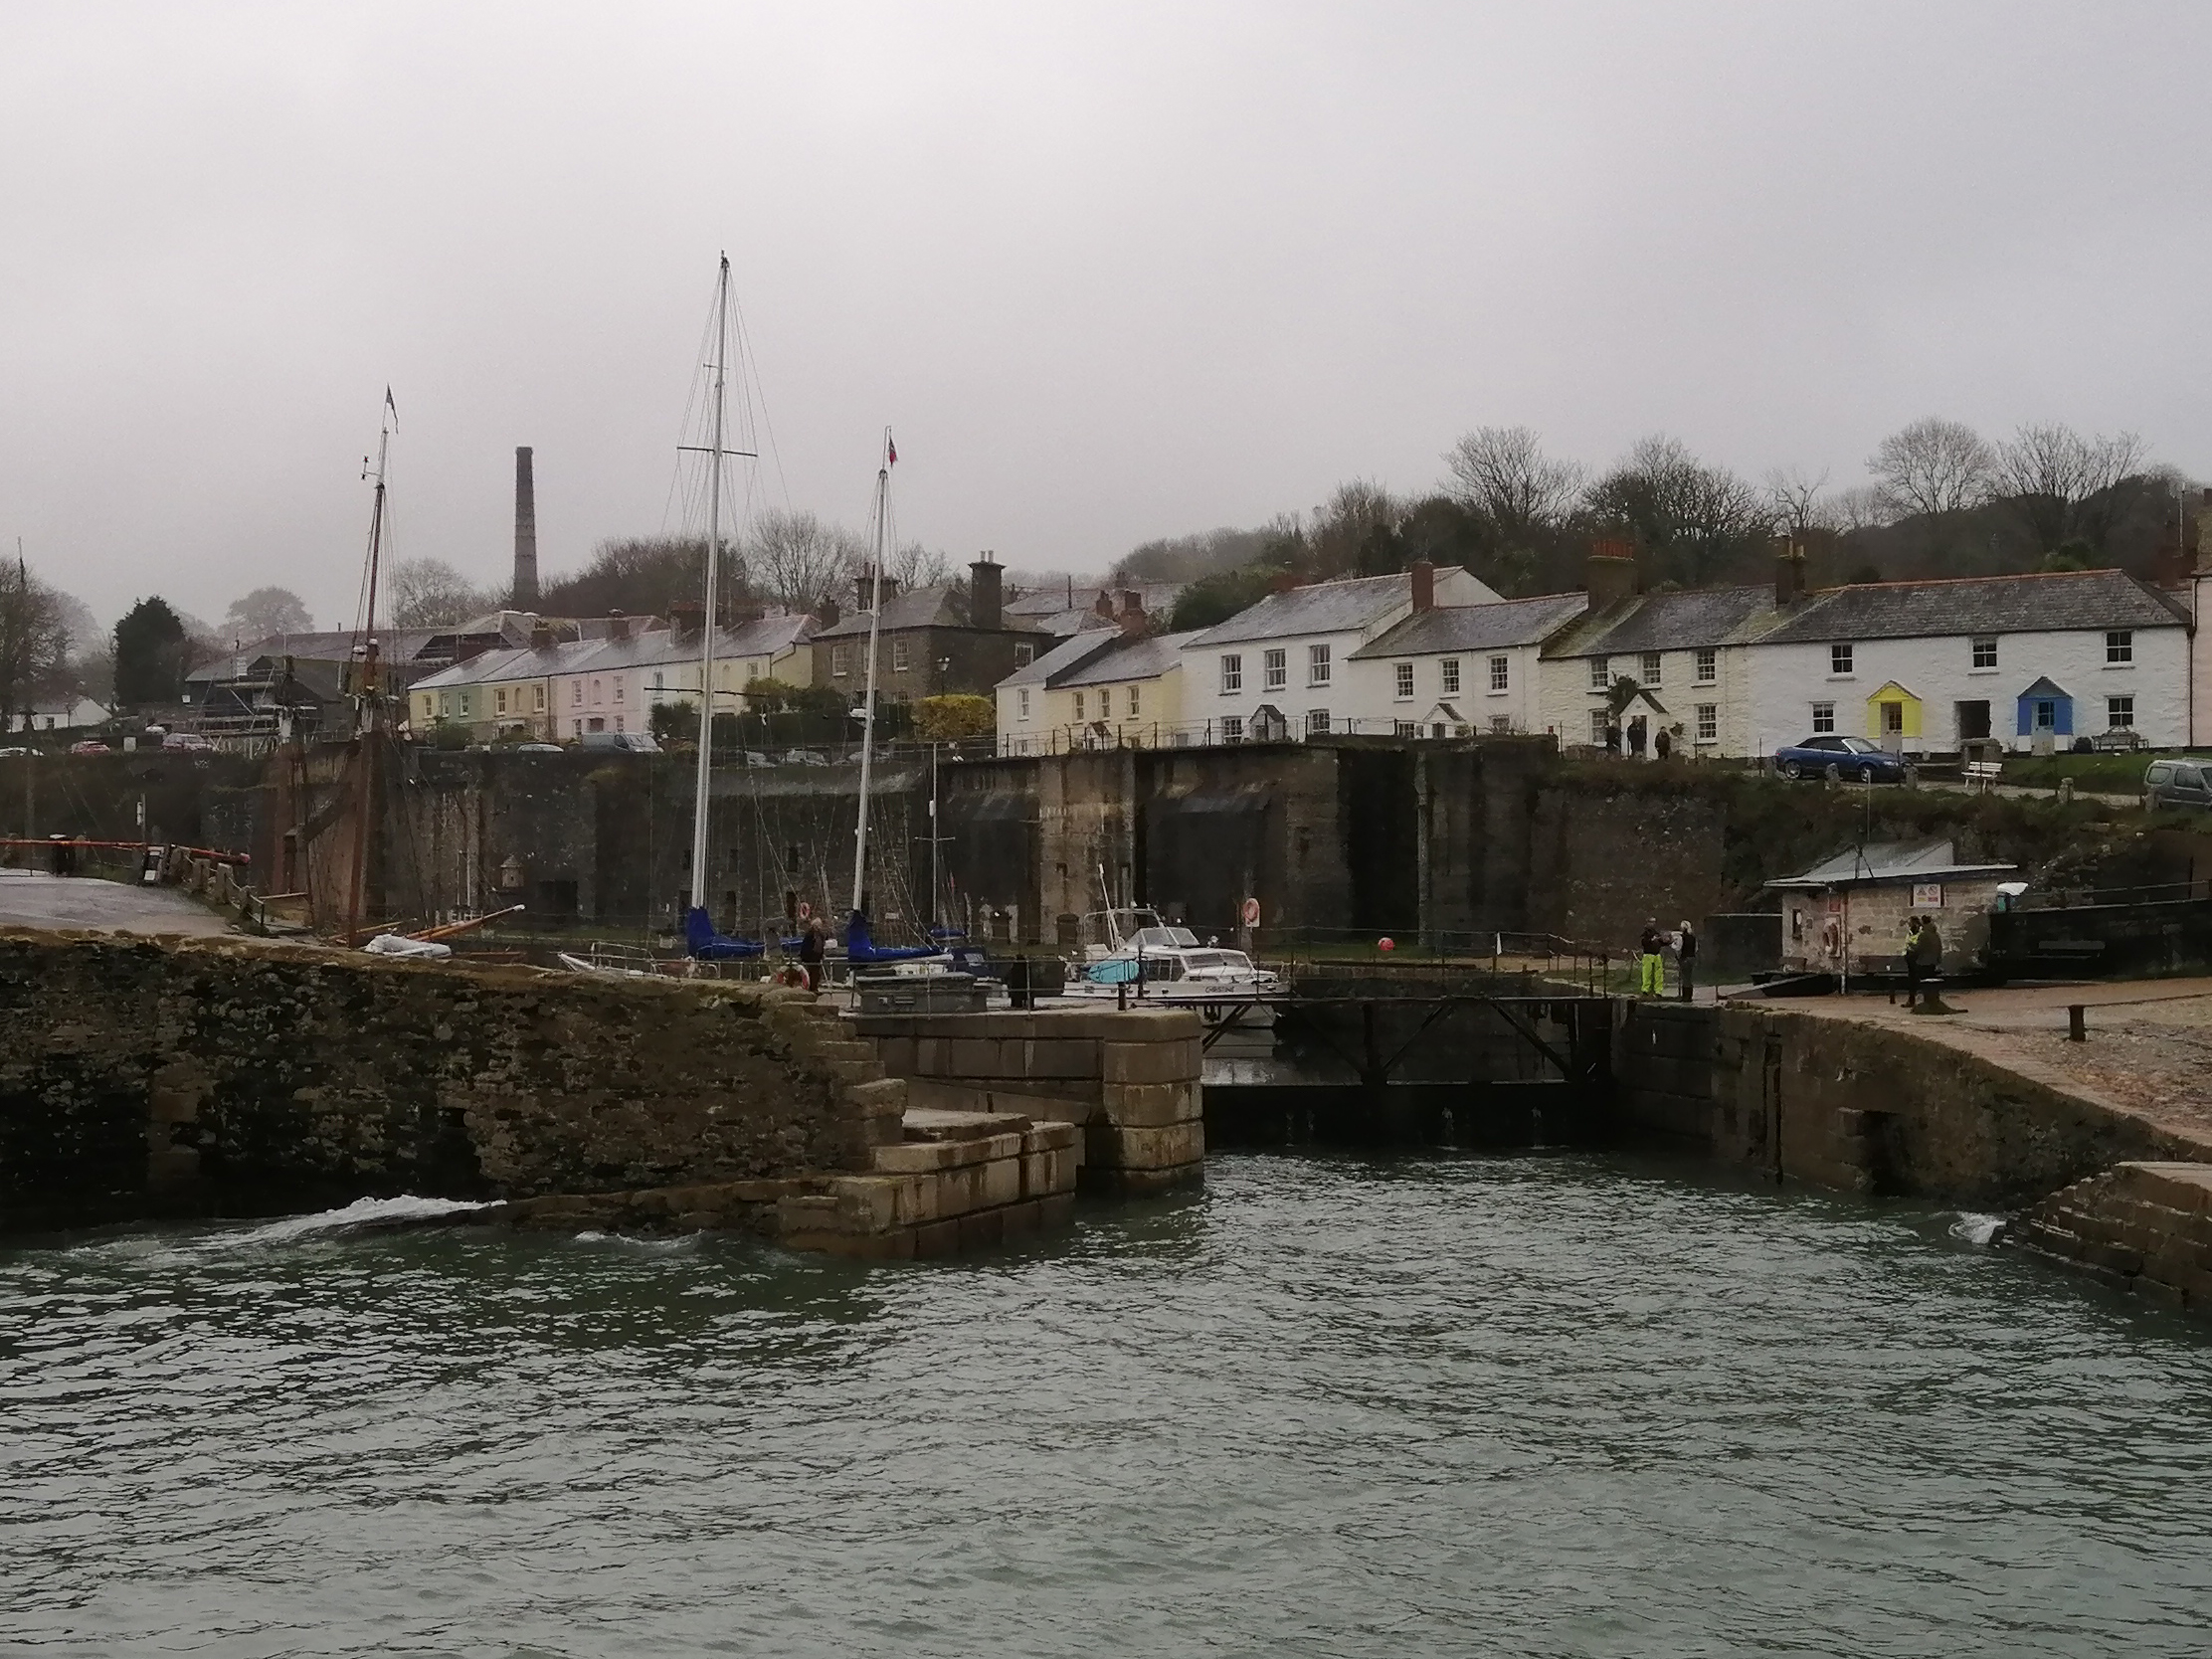 Harbour cottages at the historic port and film location of Charlestown 